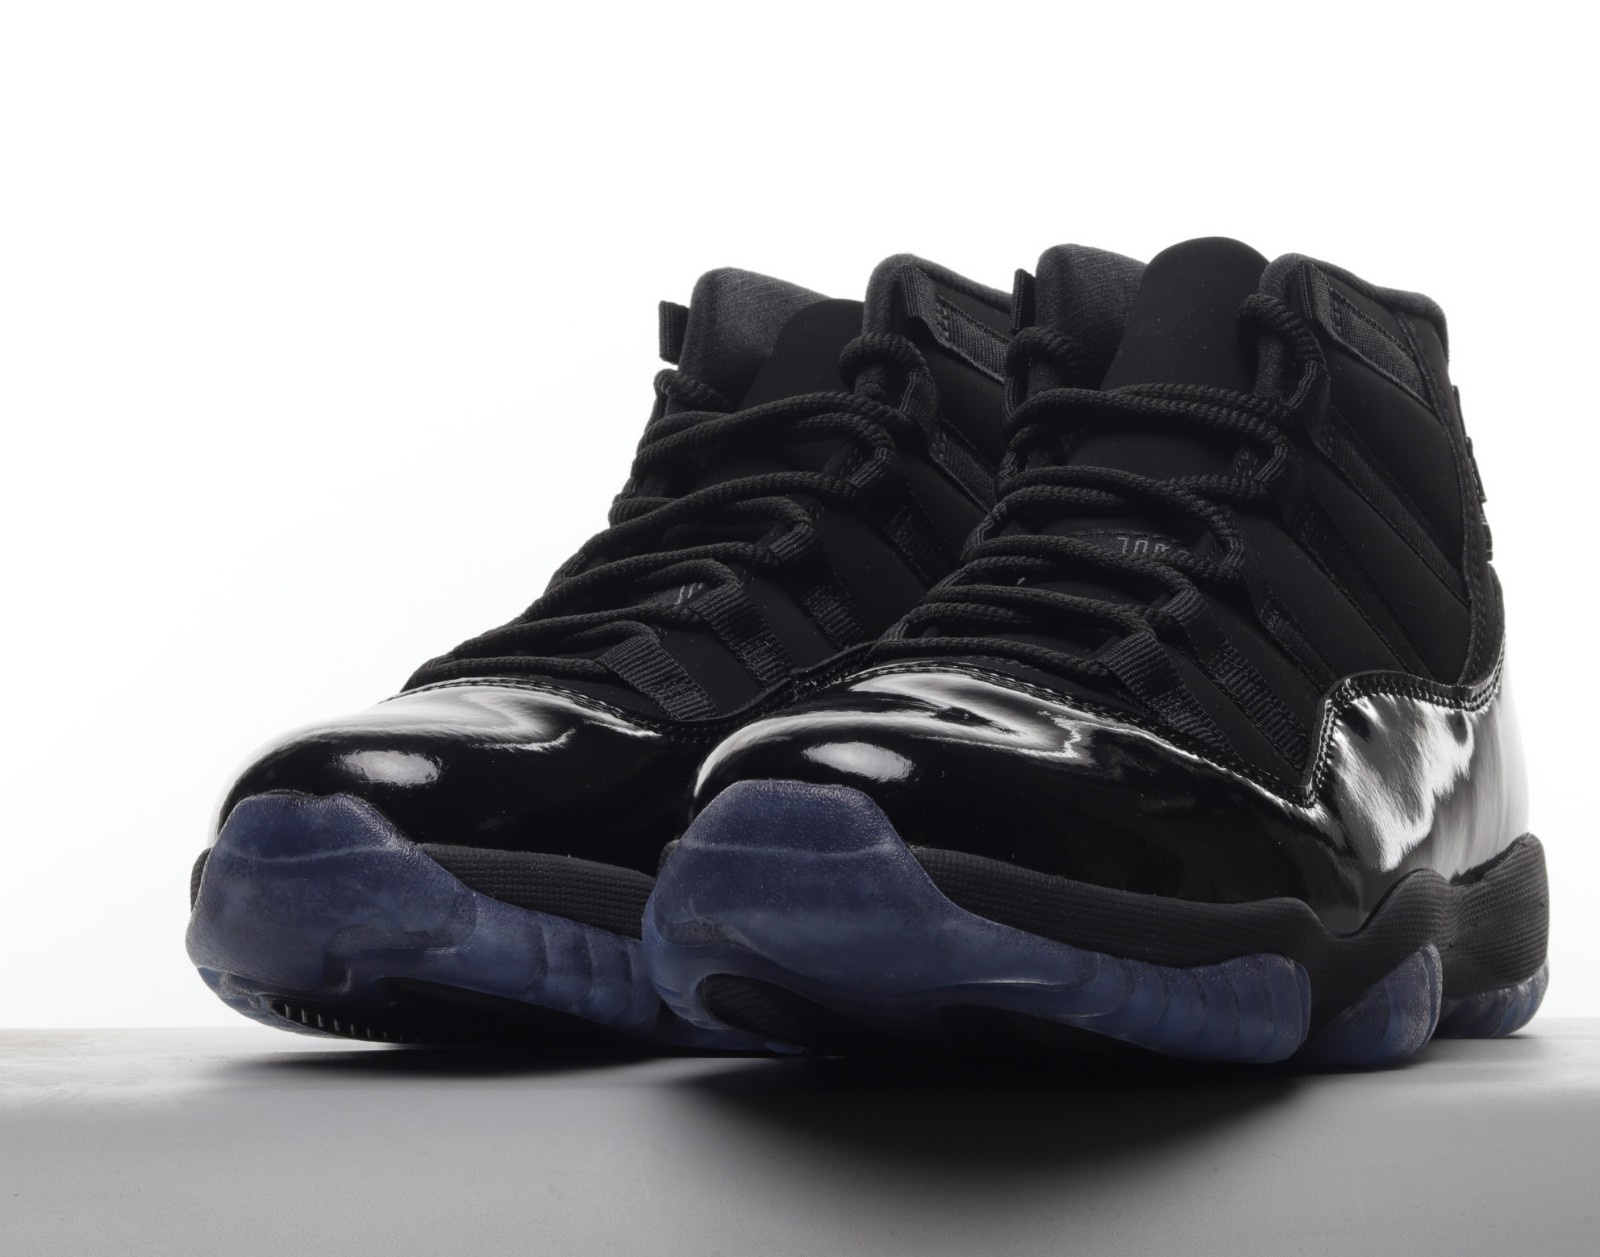 Nike Air Jordan 11 Retro Cap and Gown Black Black - MultiscaleconsultingShops - 101 - A Yellow Air Jordan 1 Low On The Way